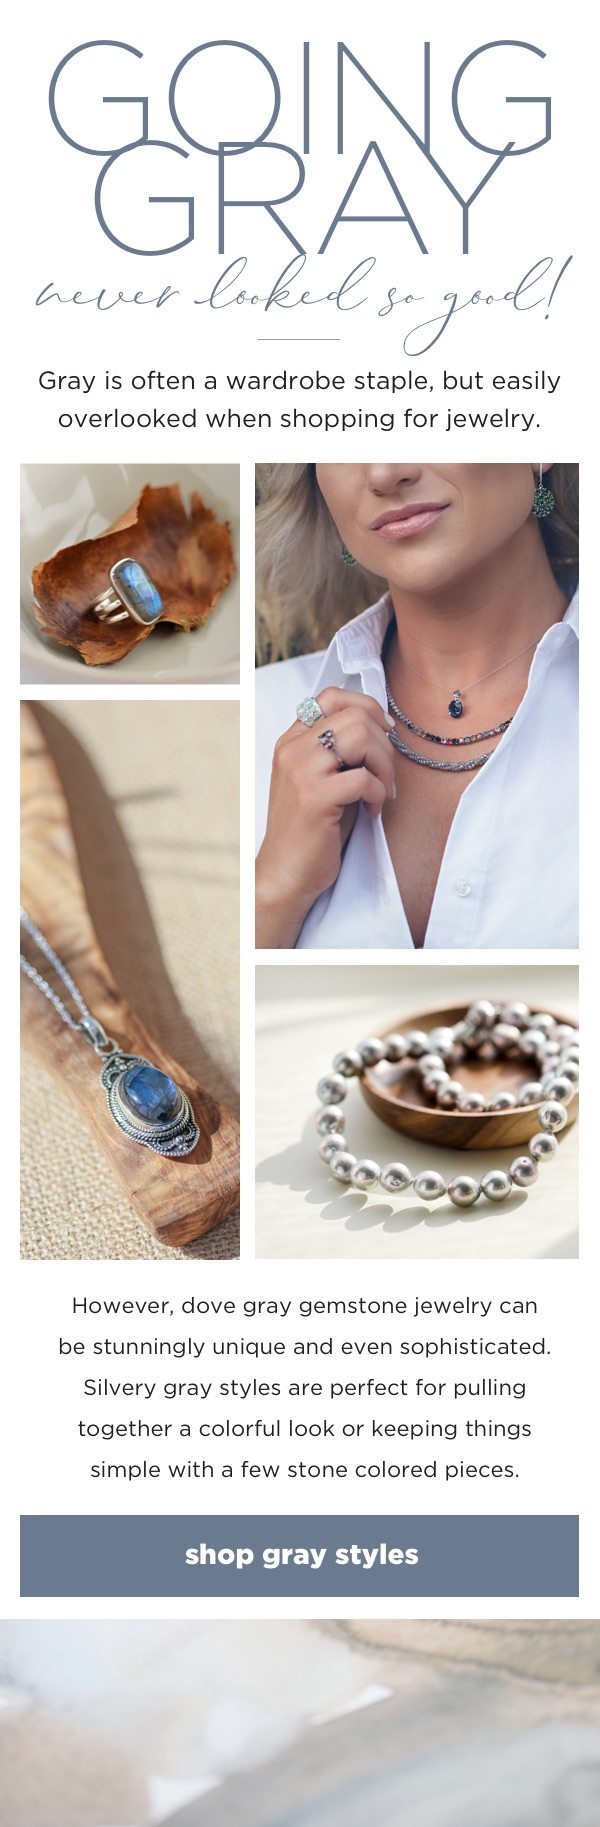 Dove gray gemstone jewelry can be stunningly unique and even sophisticated. Shop now.